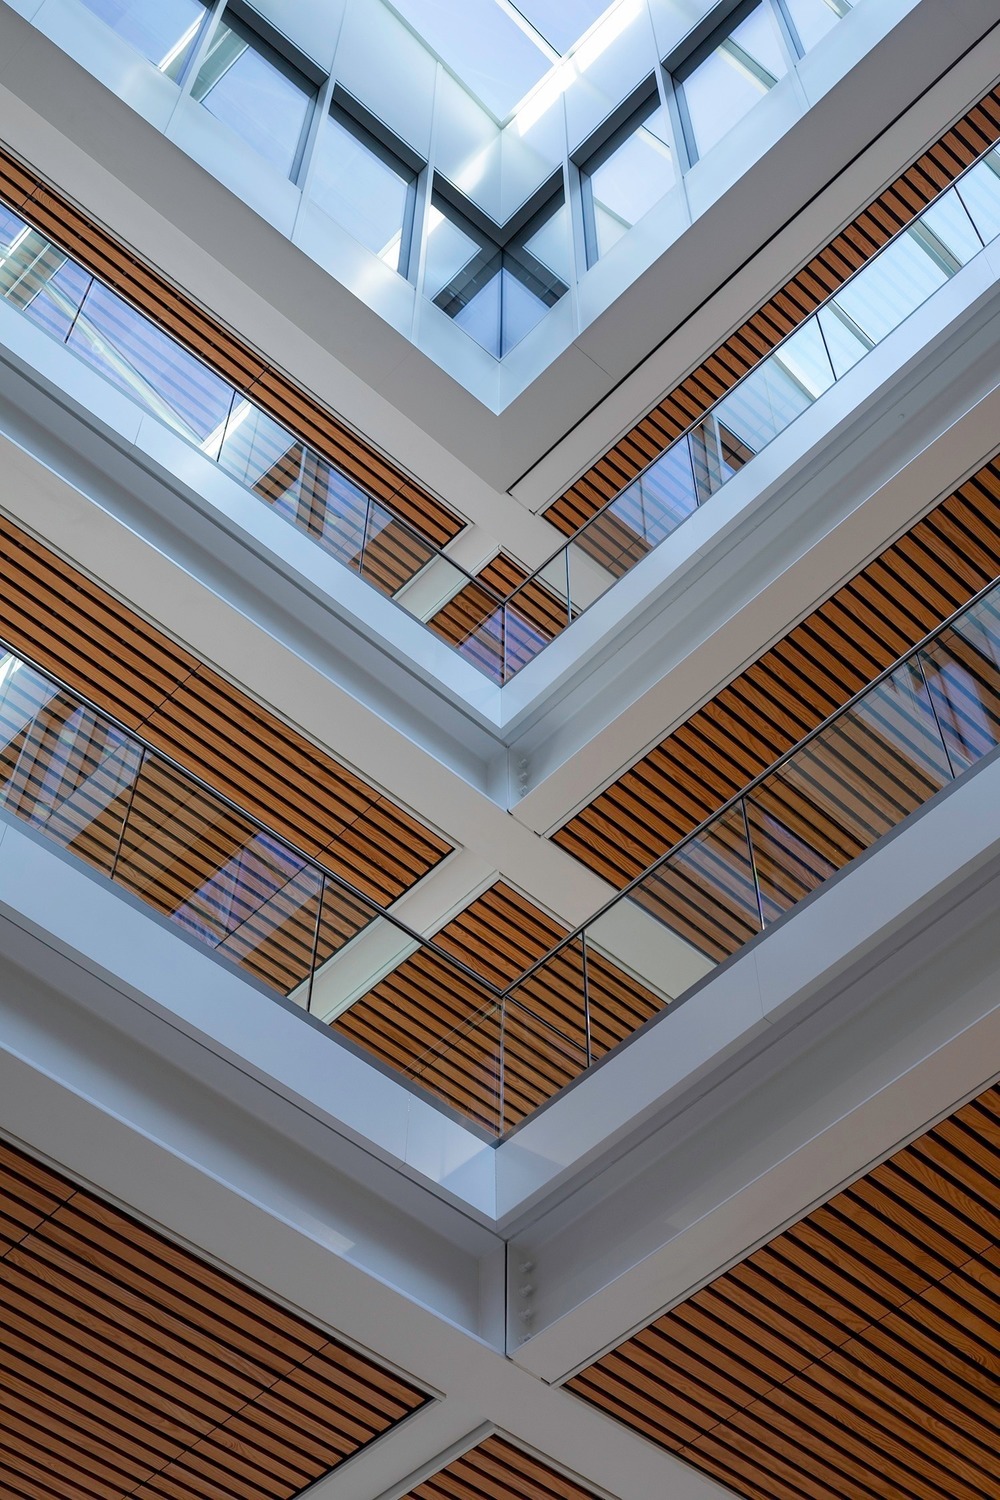 Internal light filled atrium connects the spaces and provides a focal point